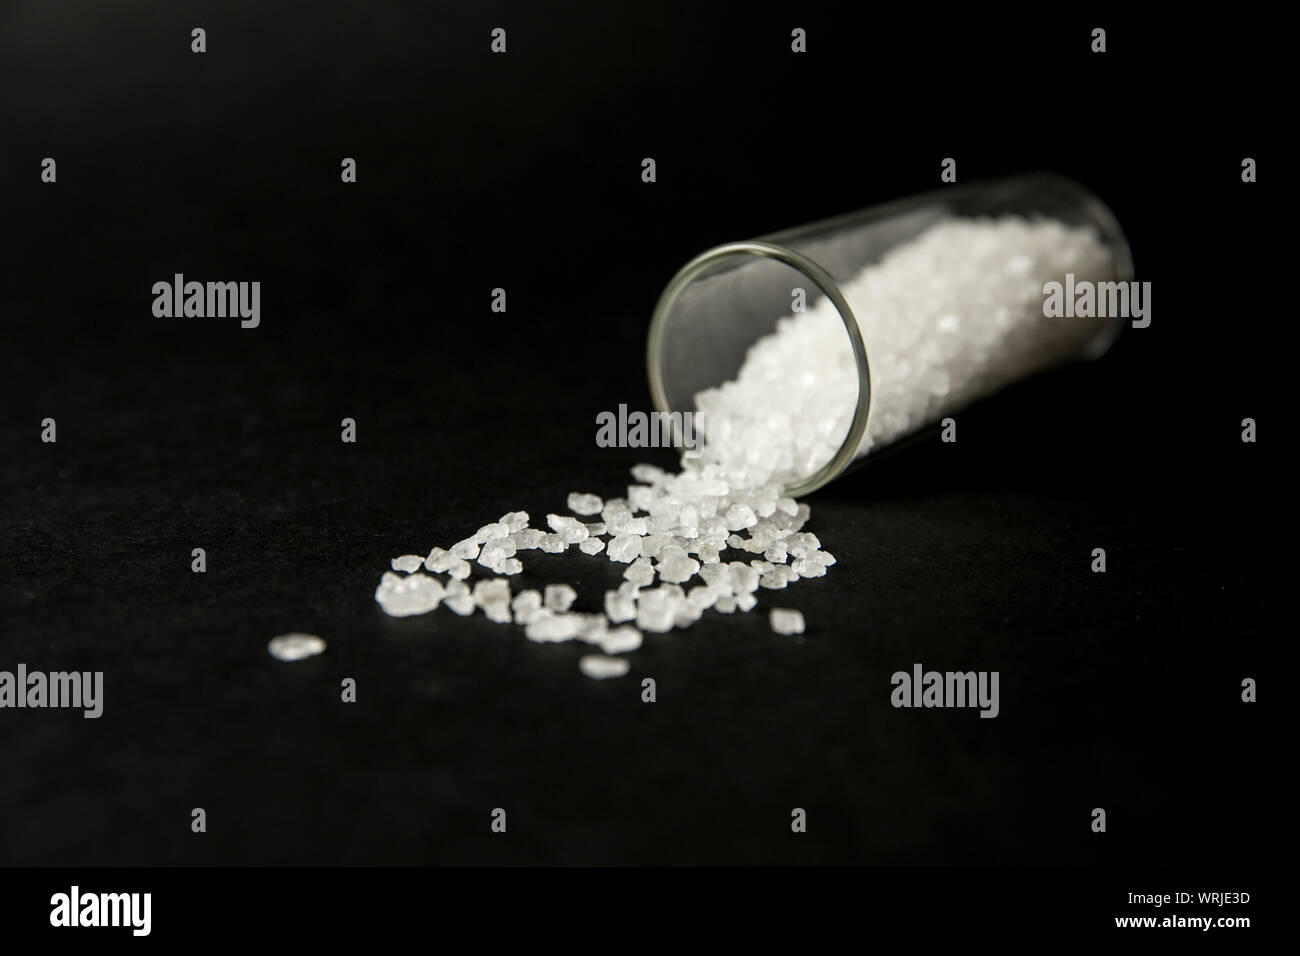 Conceptual image of 'bath salts' synthetic cathinones drugs narcotics concept. White crystal powder on black background( set up), resemble to bathroom Stock Photo